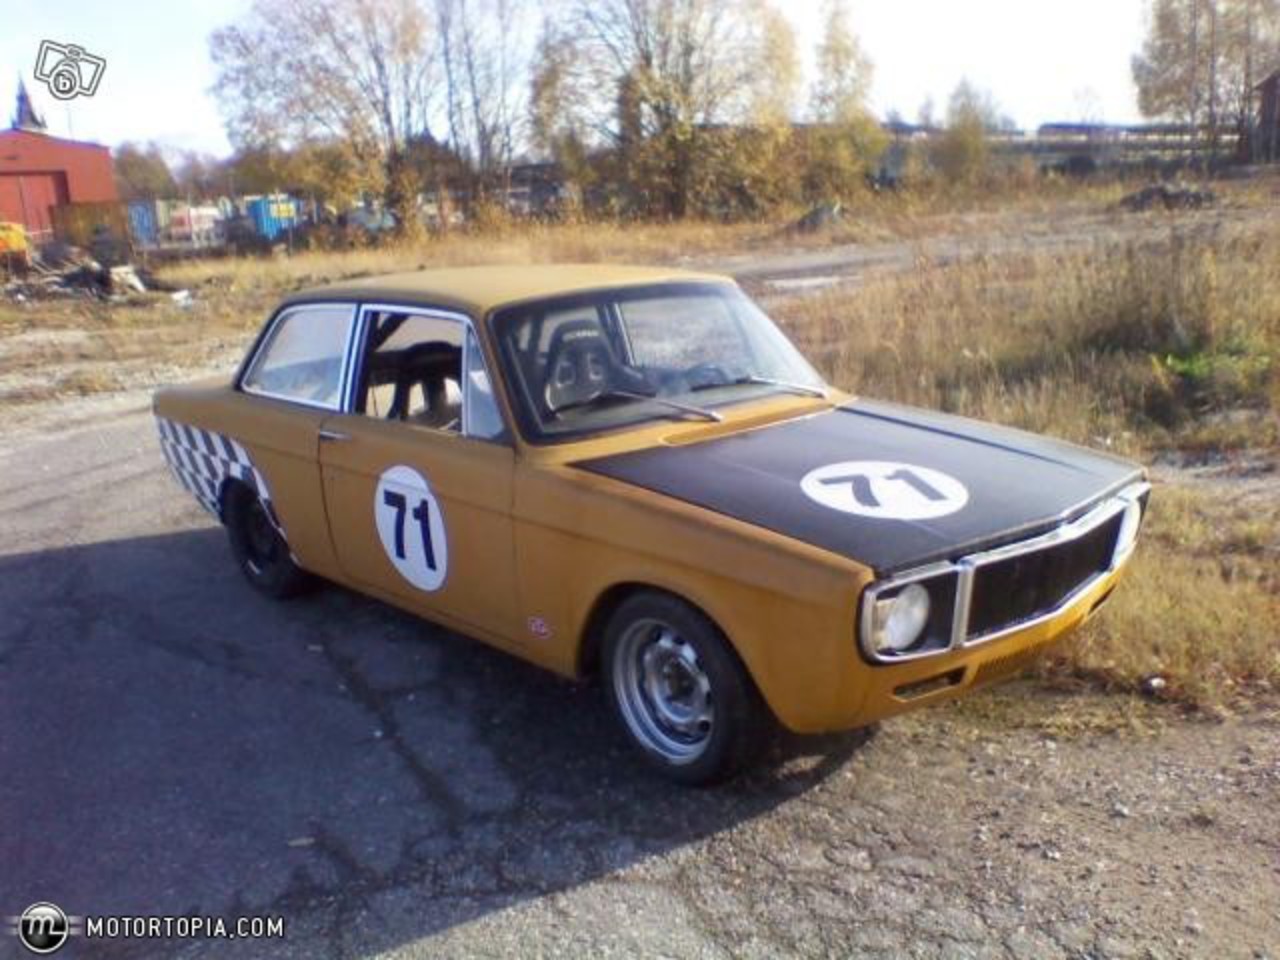 Photo of a 1971 Volvo 142 DL (ANKAN). 975 views; comment; forward car